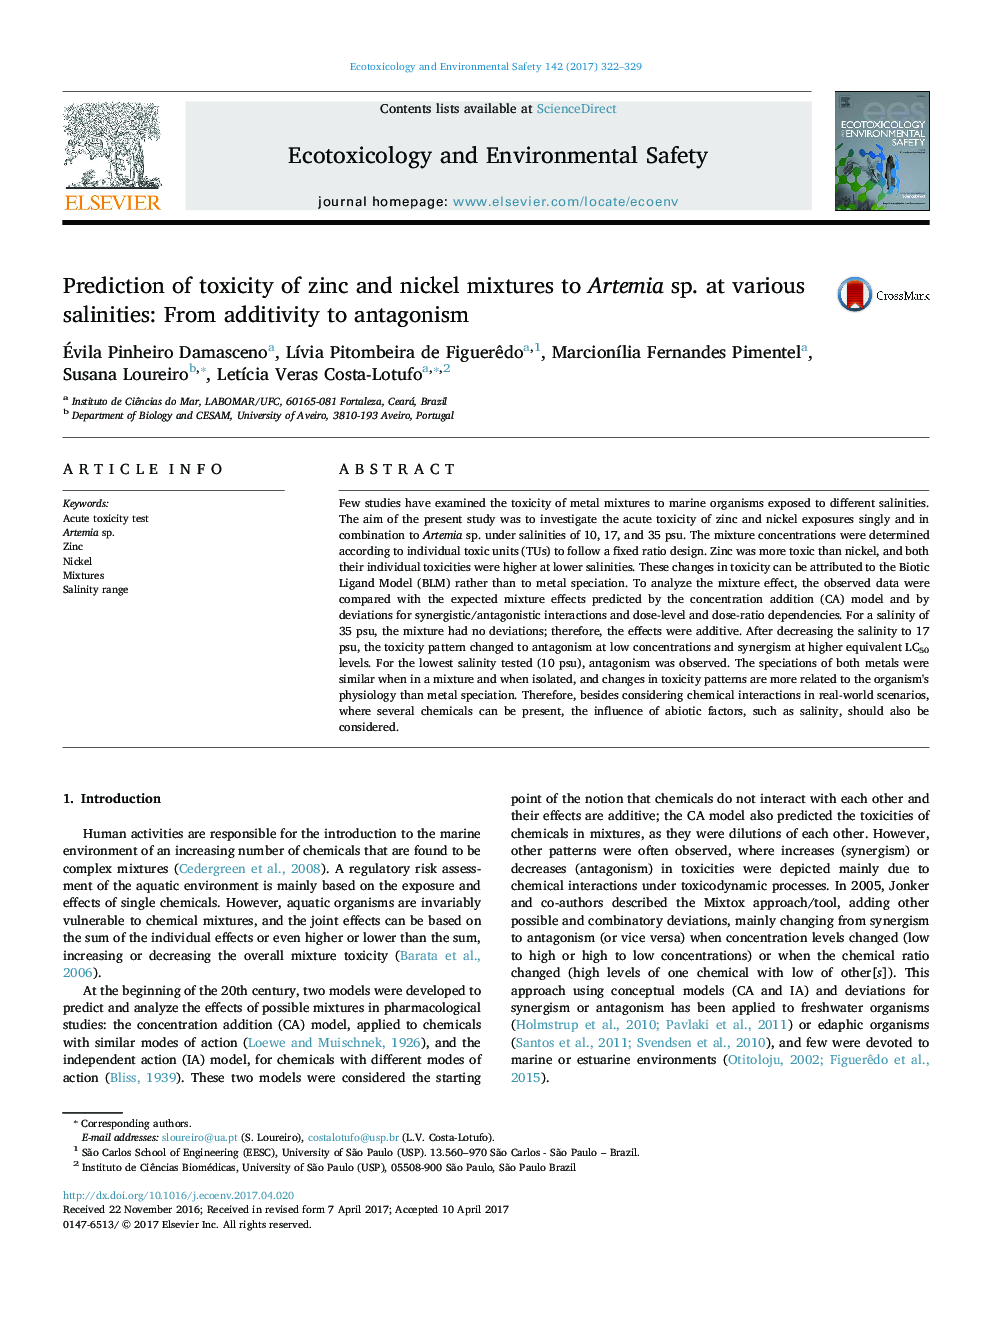 Prediction of toxicity of zinc and nickel mixtures to Artemia sp. at various salinities: From additivity to antagonism